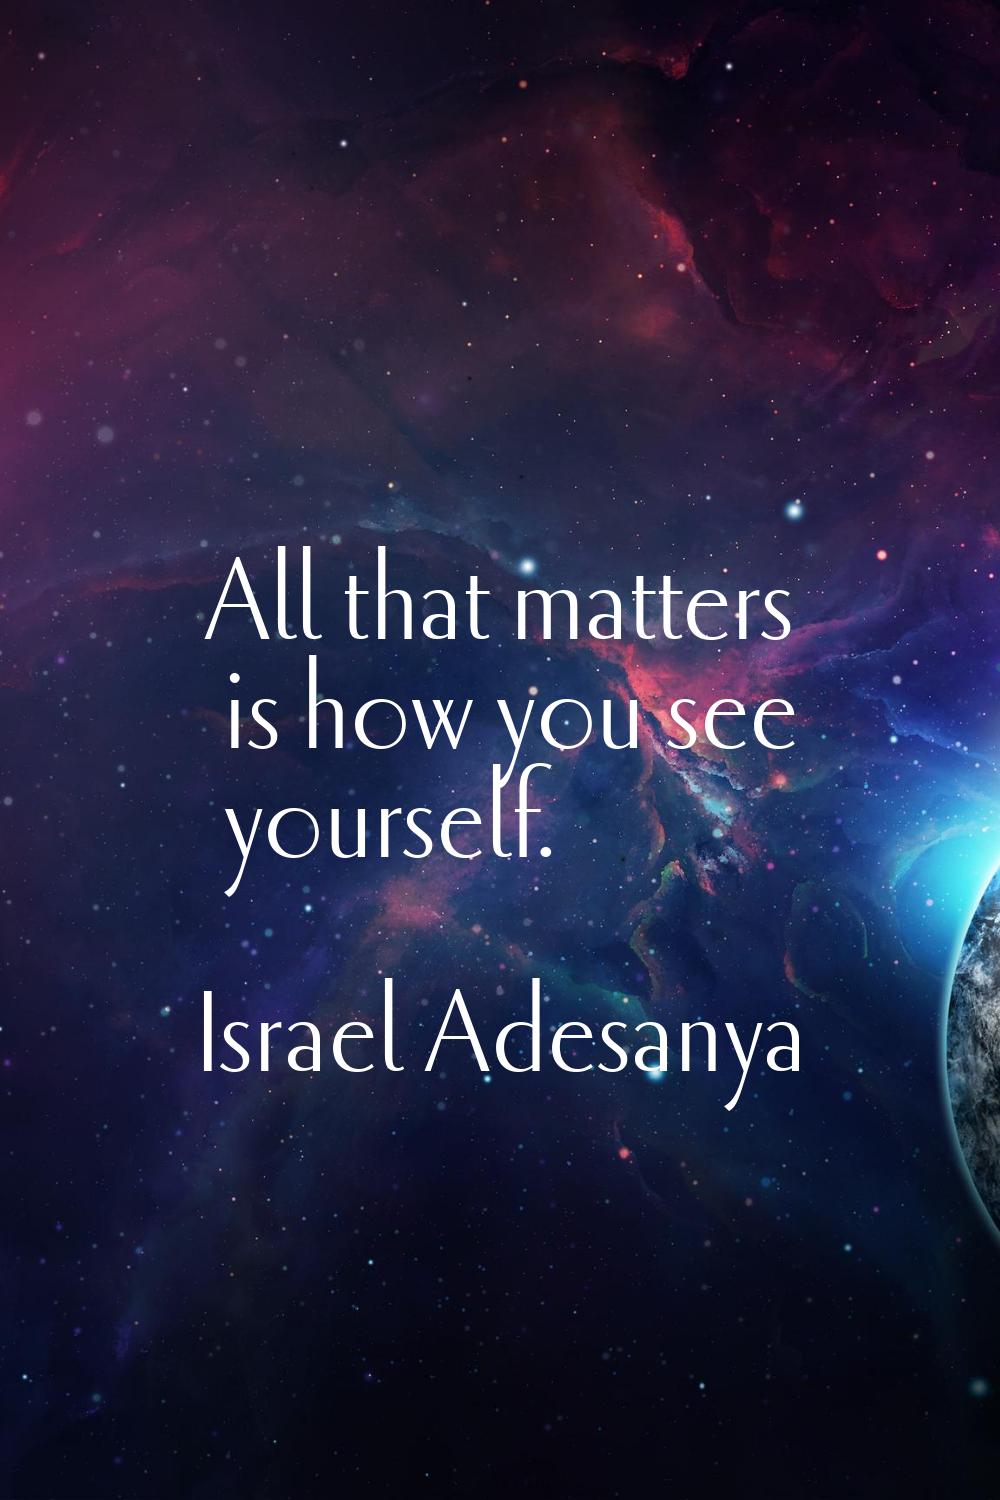 All that matters is how you see yourself.